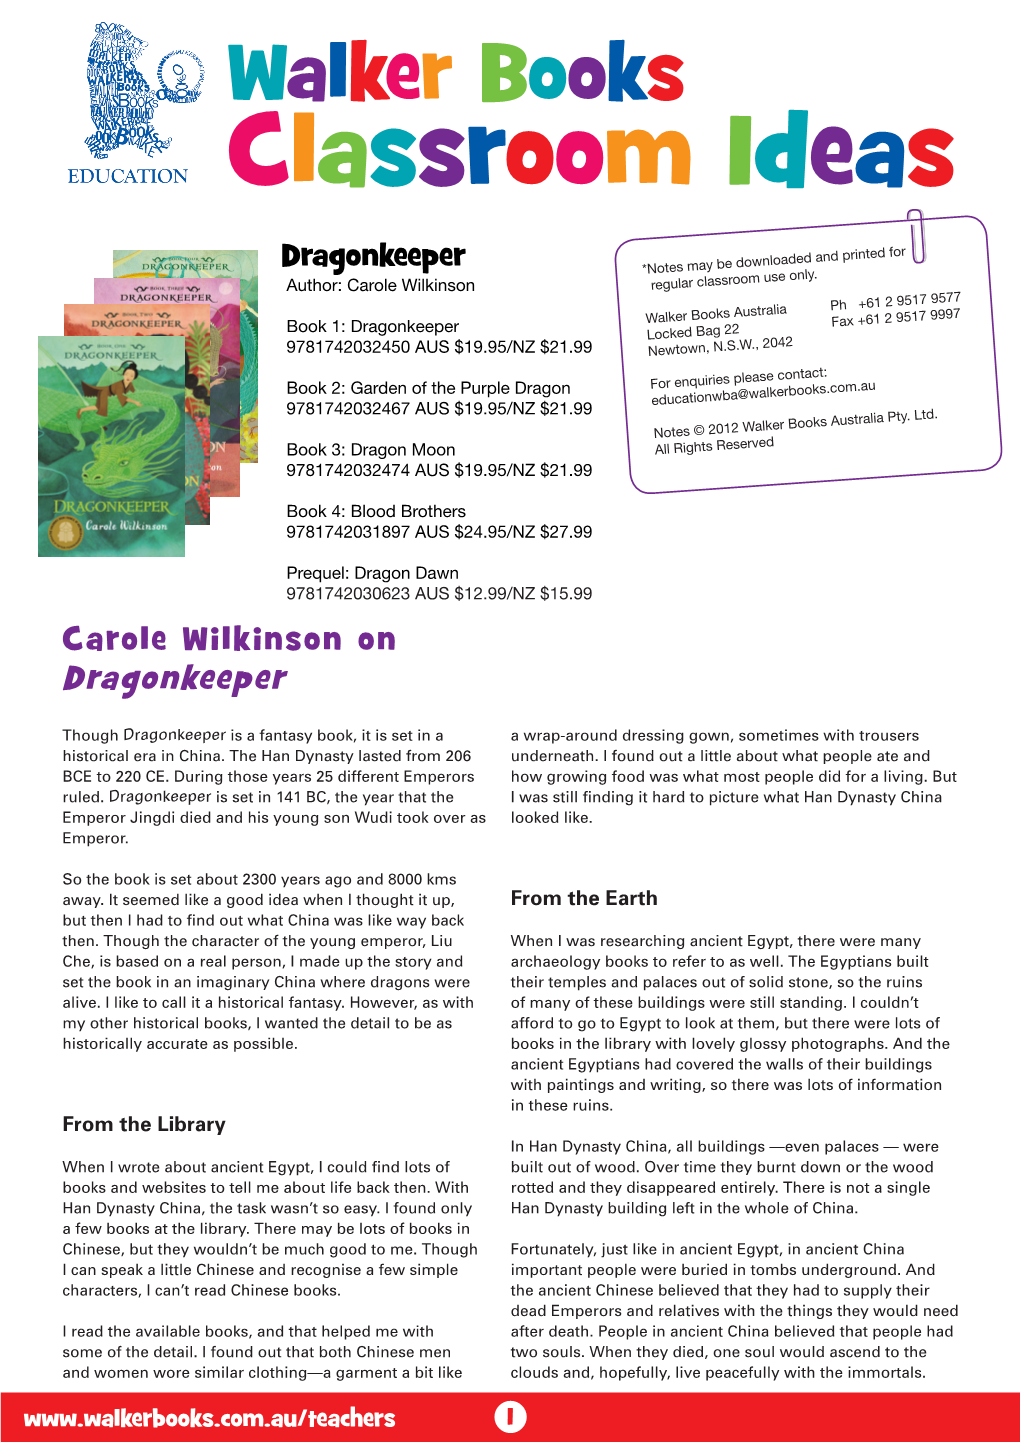 Dragonkeeper *Notes May Be Downloaded and Printed for Author: Carole Wilkinson Regular Classroom Use Only